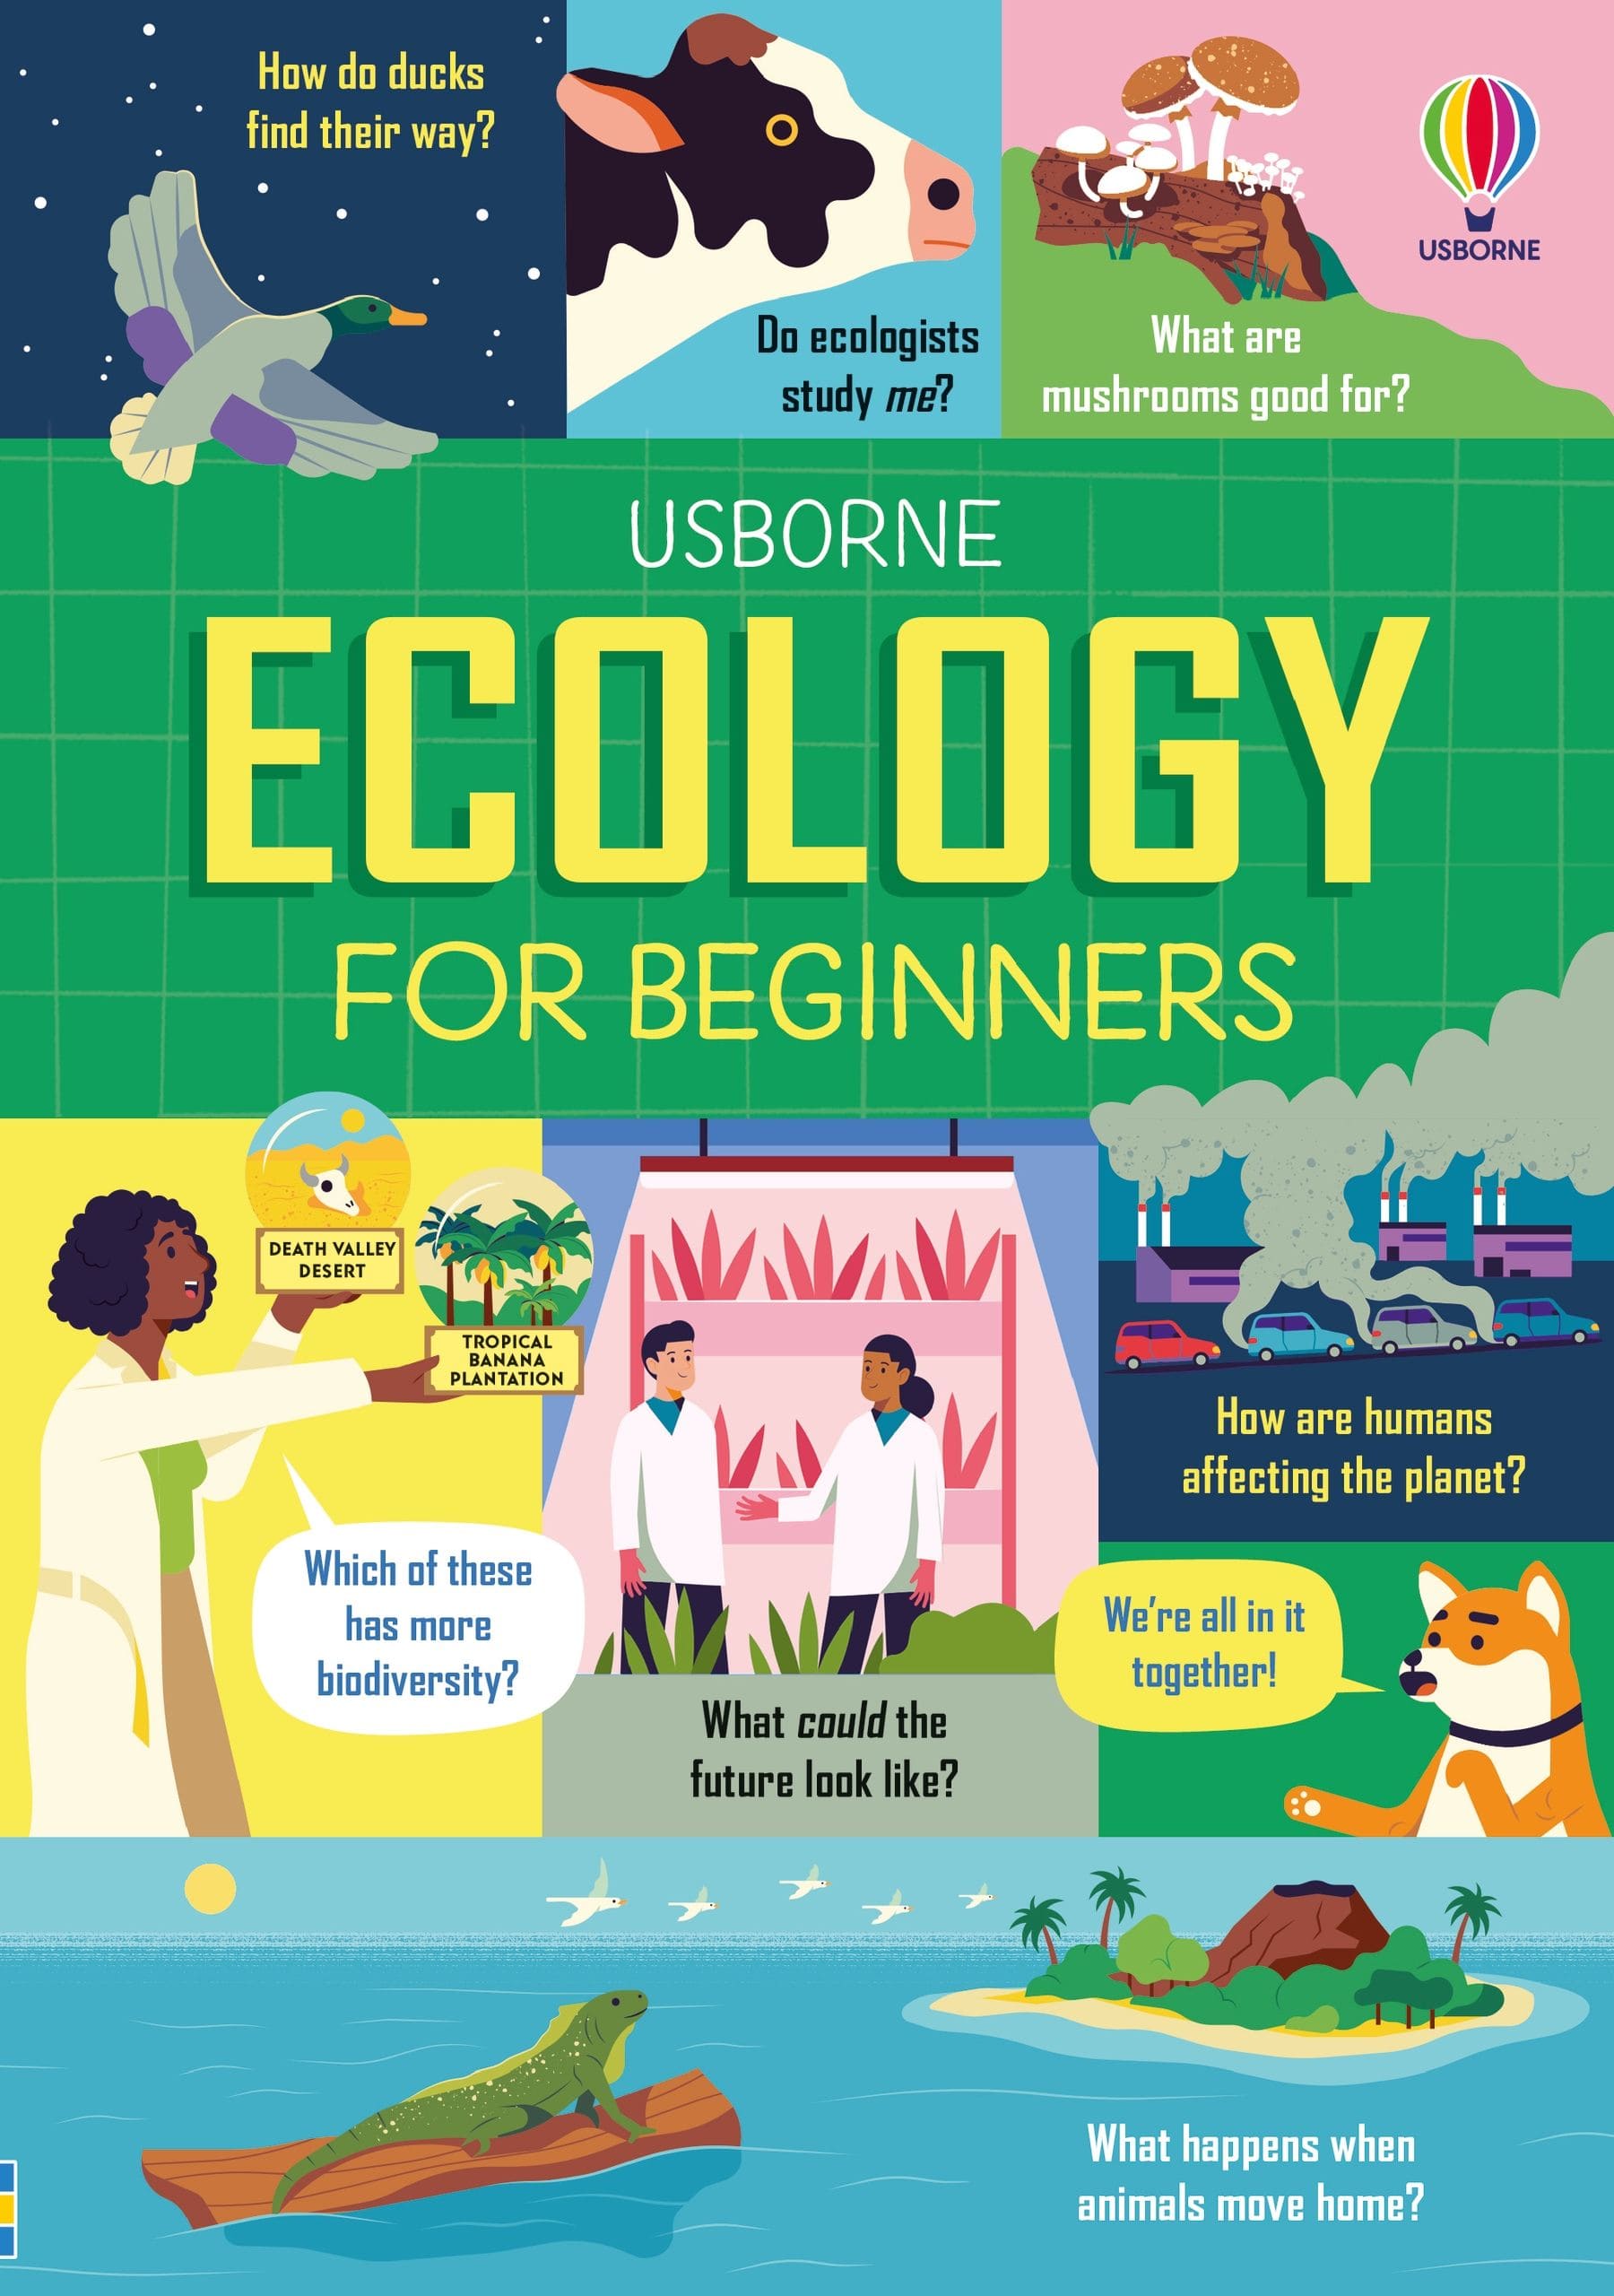 Usborne Ecology for Beginners Lan Cook, Andy Prentice  Illustrated by Anton Hallmann